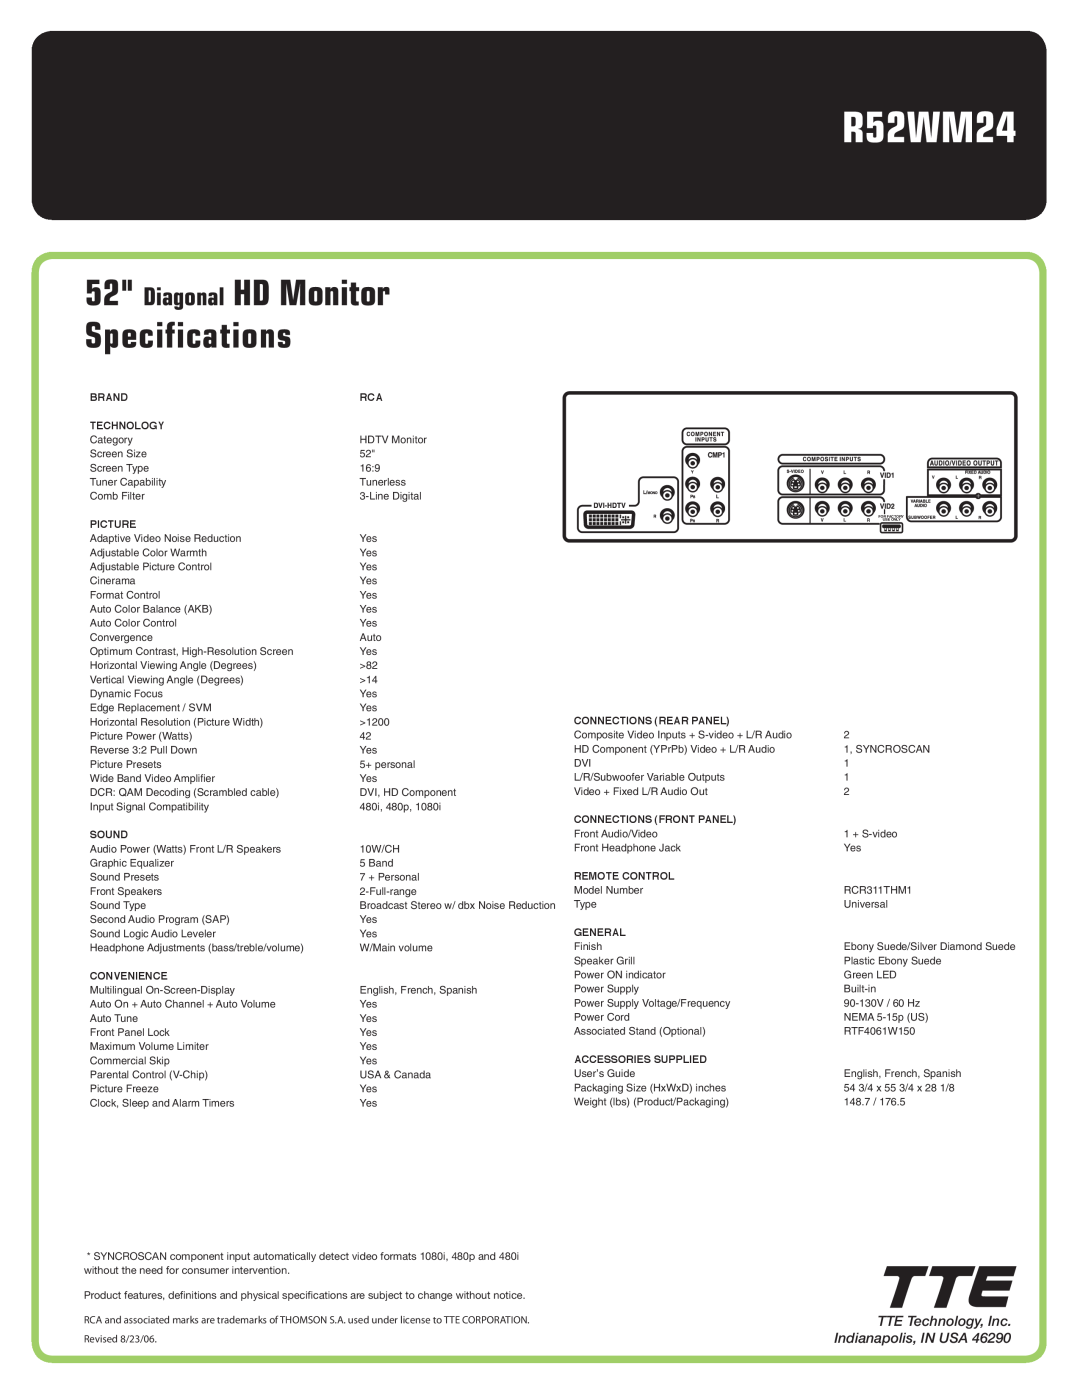 RCA R52WM24 manual Diagonal HD Monitor Specifications, TTE Technology, Inc. Indianapolis, IN USA 